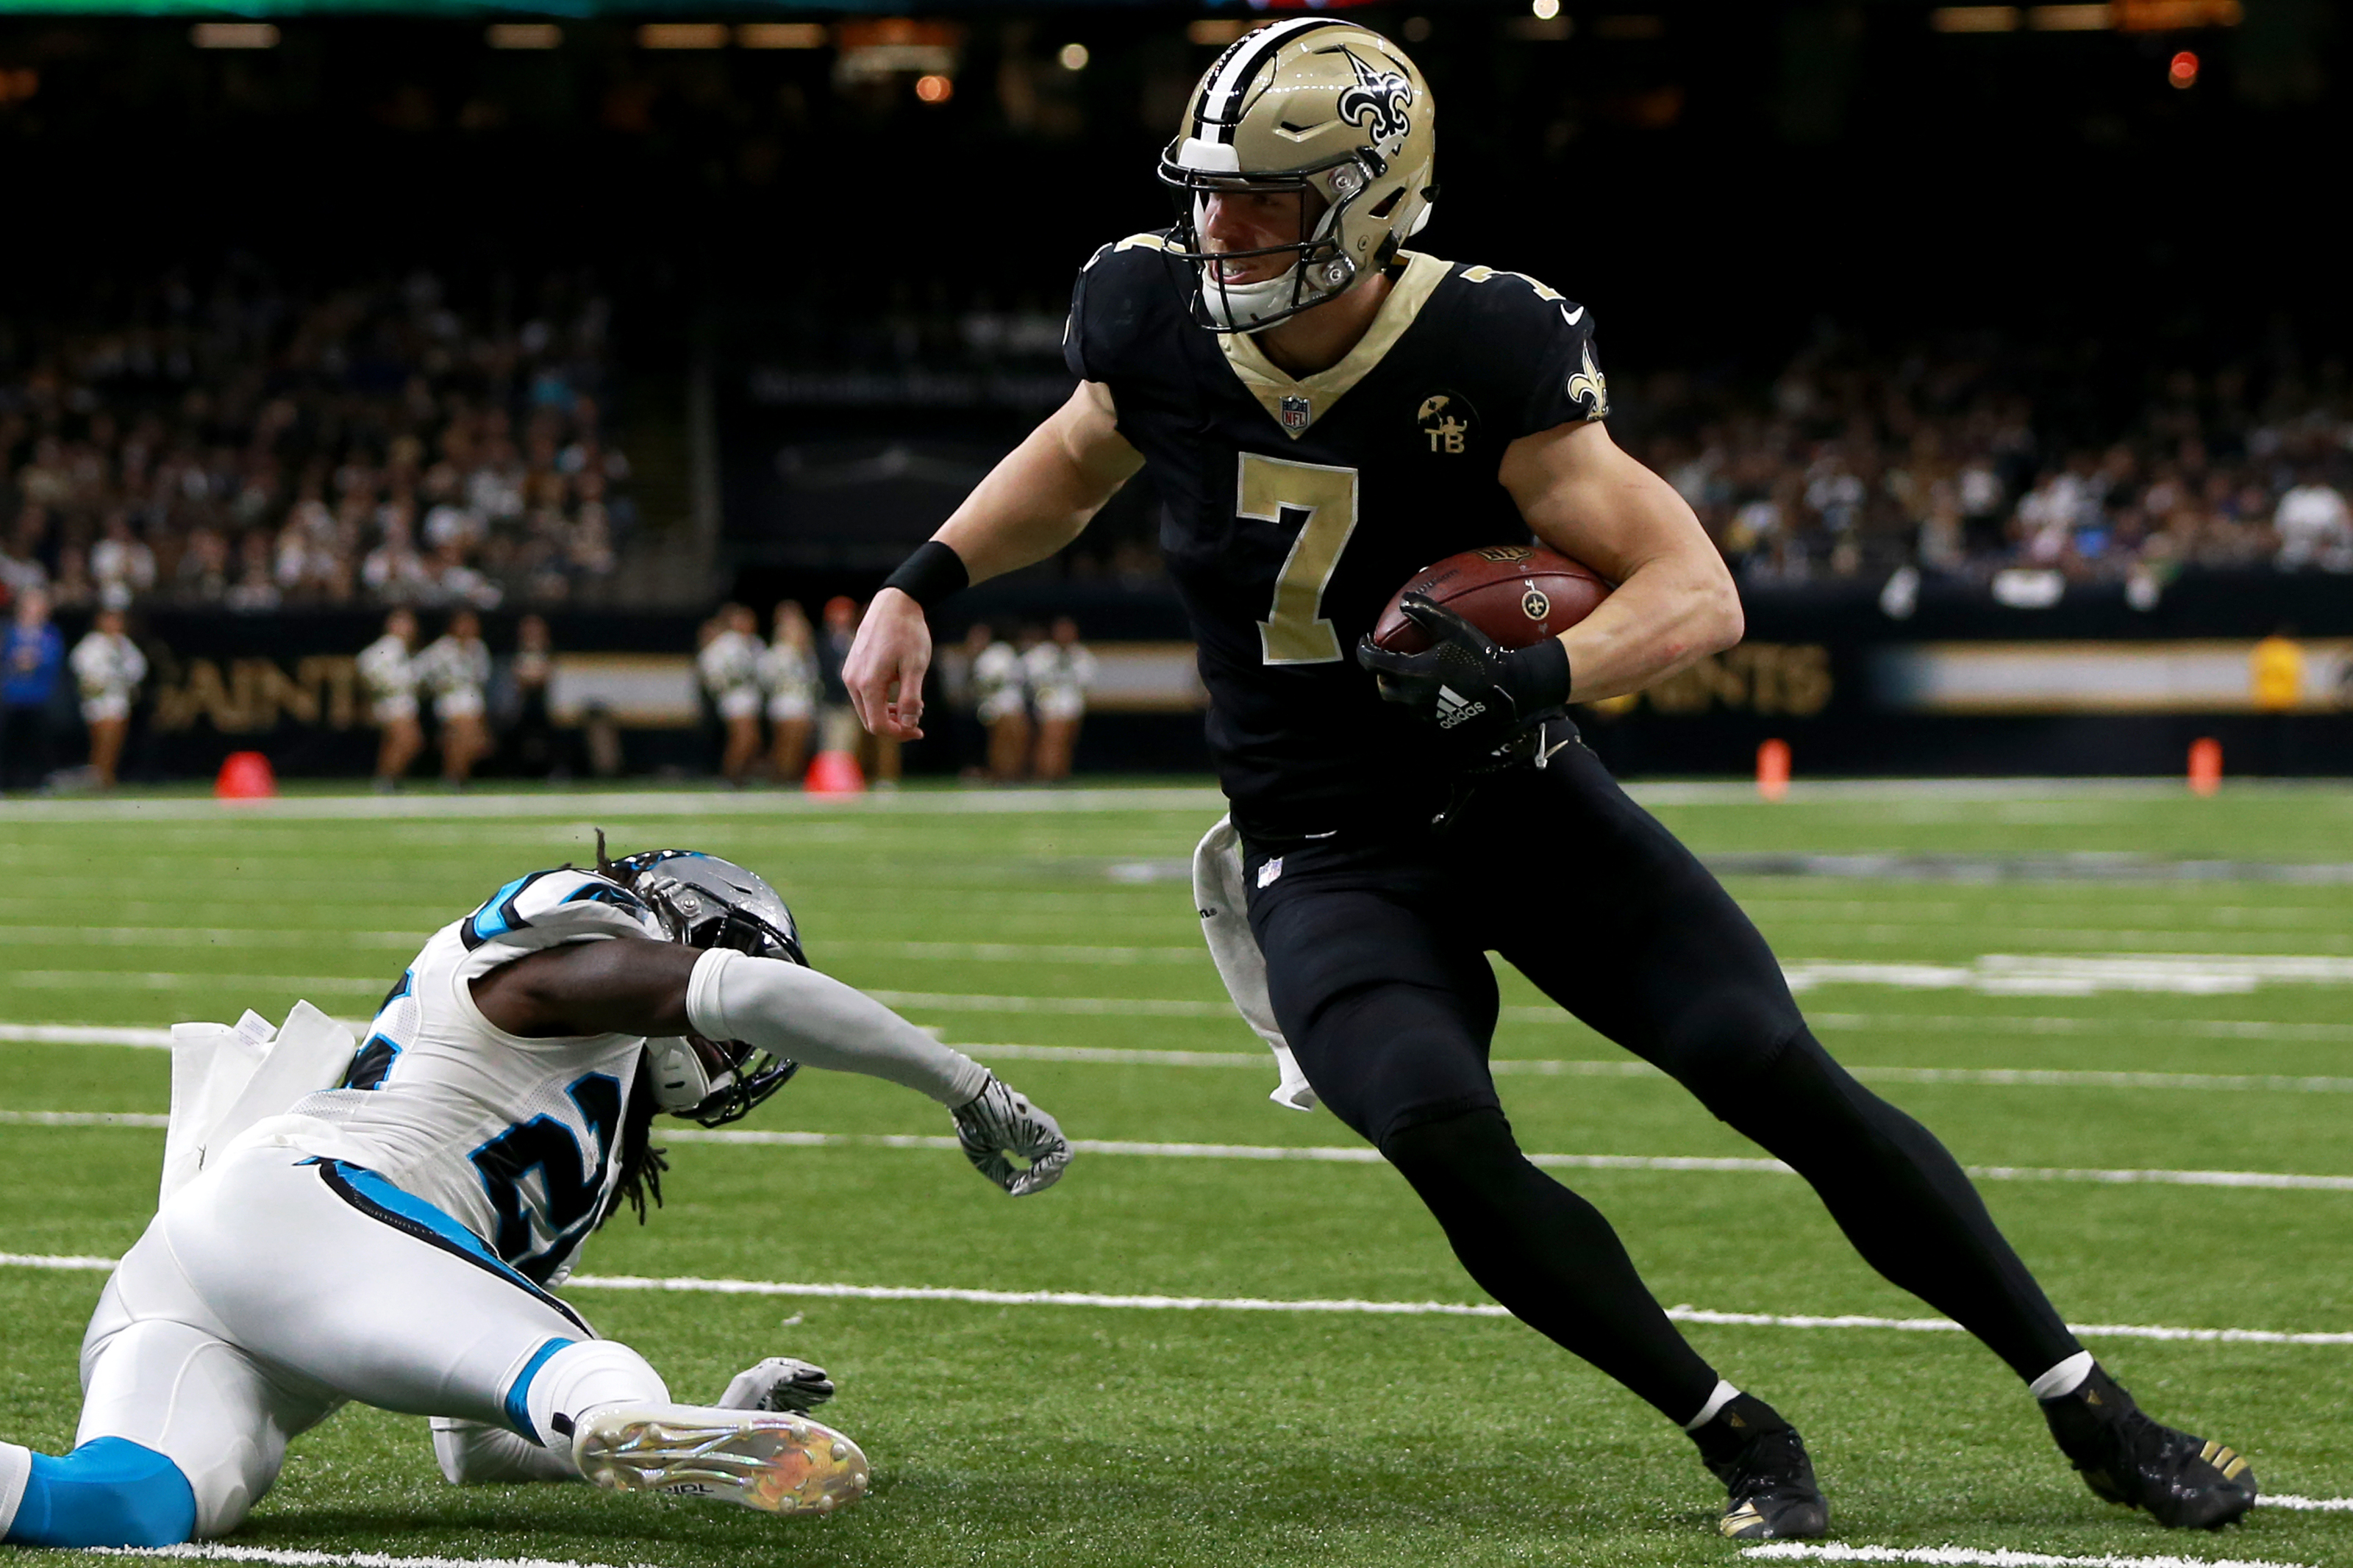 New Orleans Saints: Taysom Hill remains the not-so-secret weapon